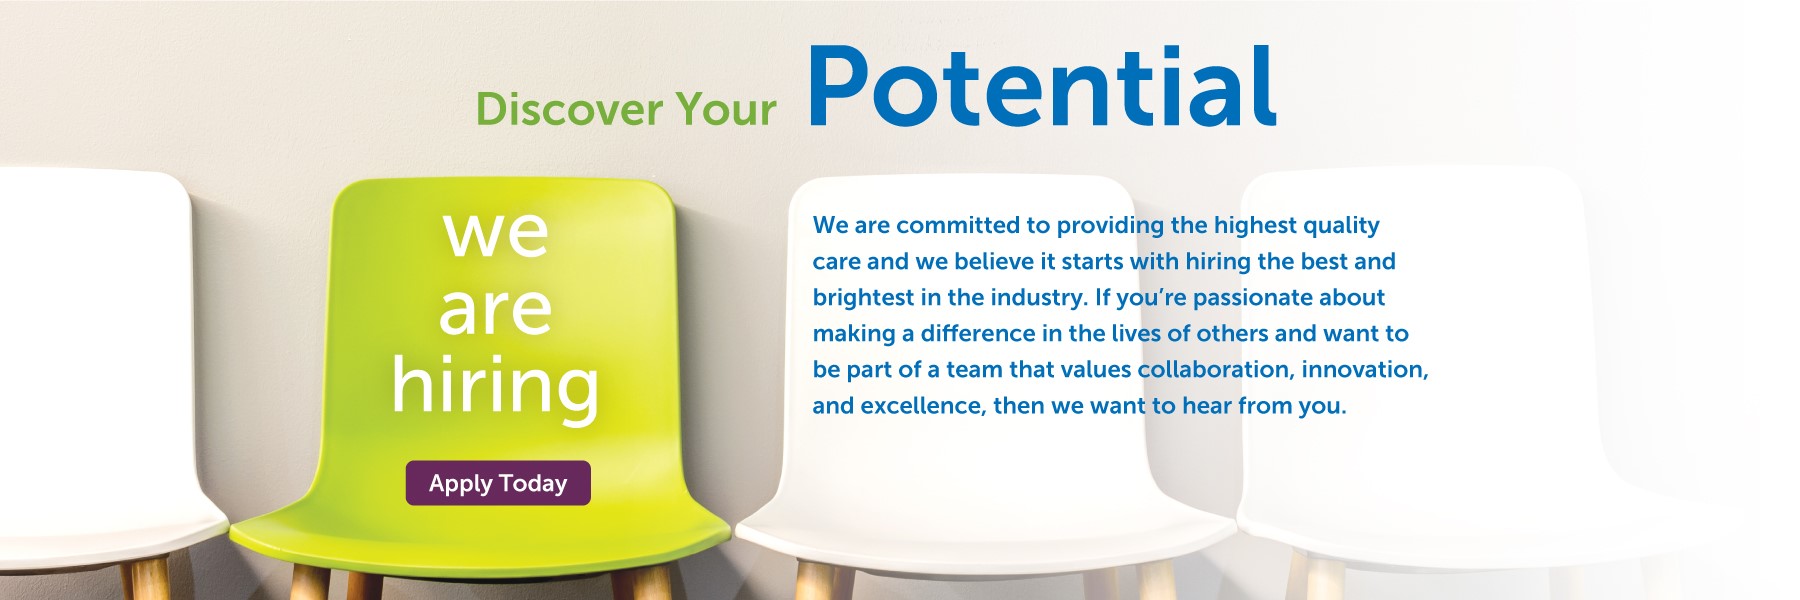 discover your potential, we are hiring! apply today